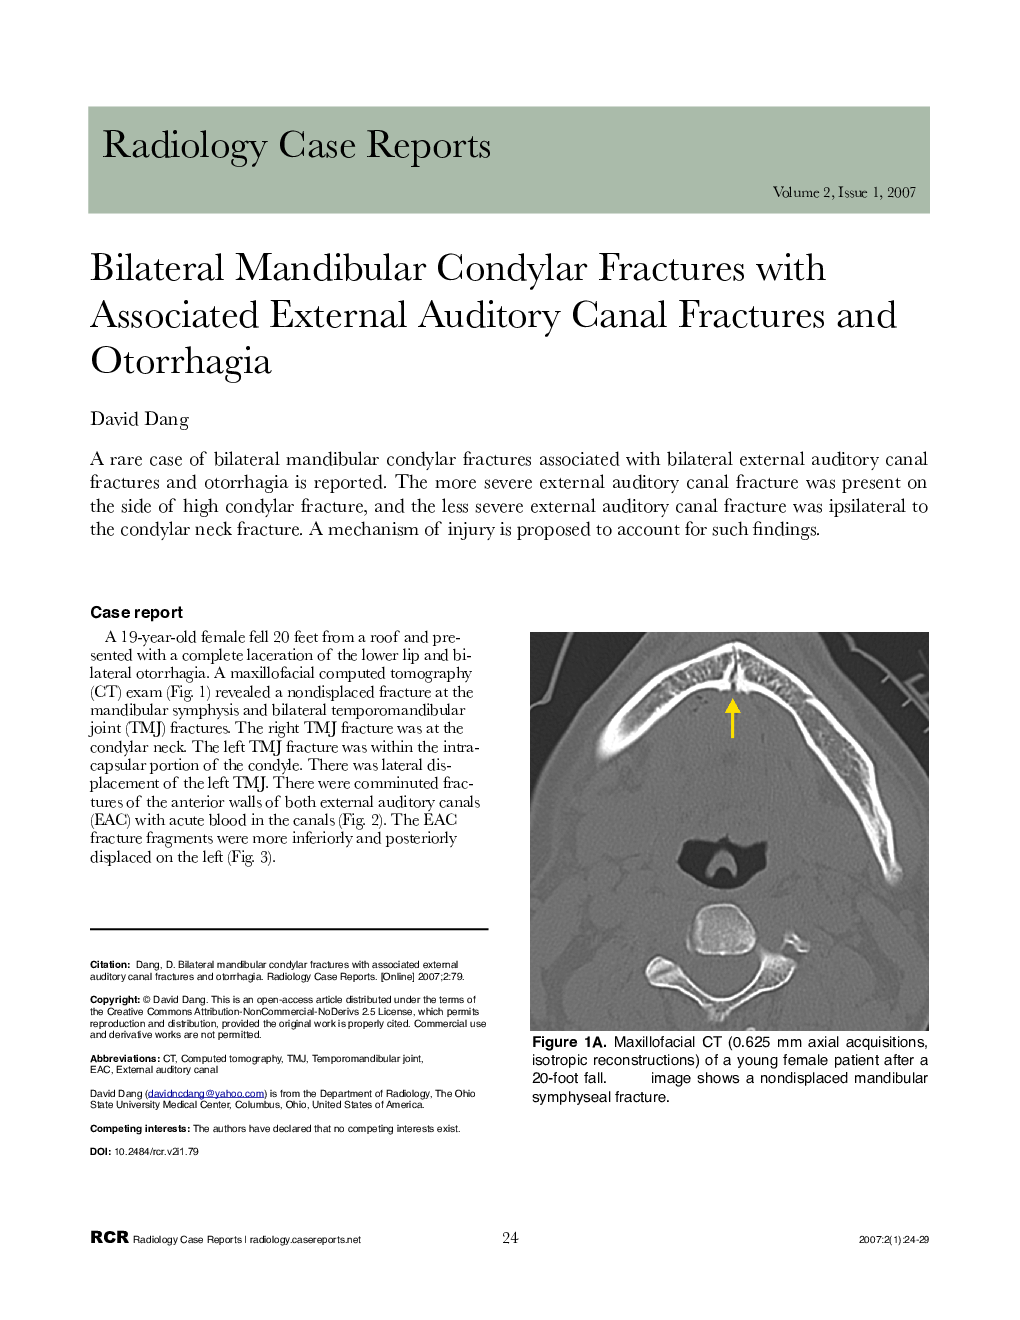 Bilateral Mandibular Condylar Fractures with Associated External Auditory Canal Fractures and Otorrhagia 